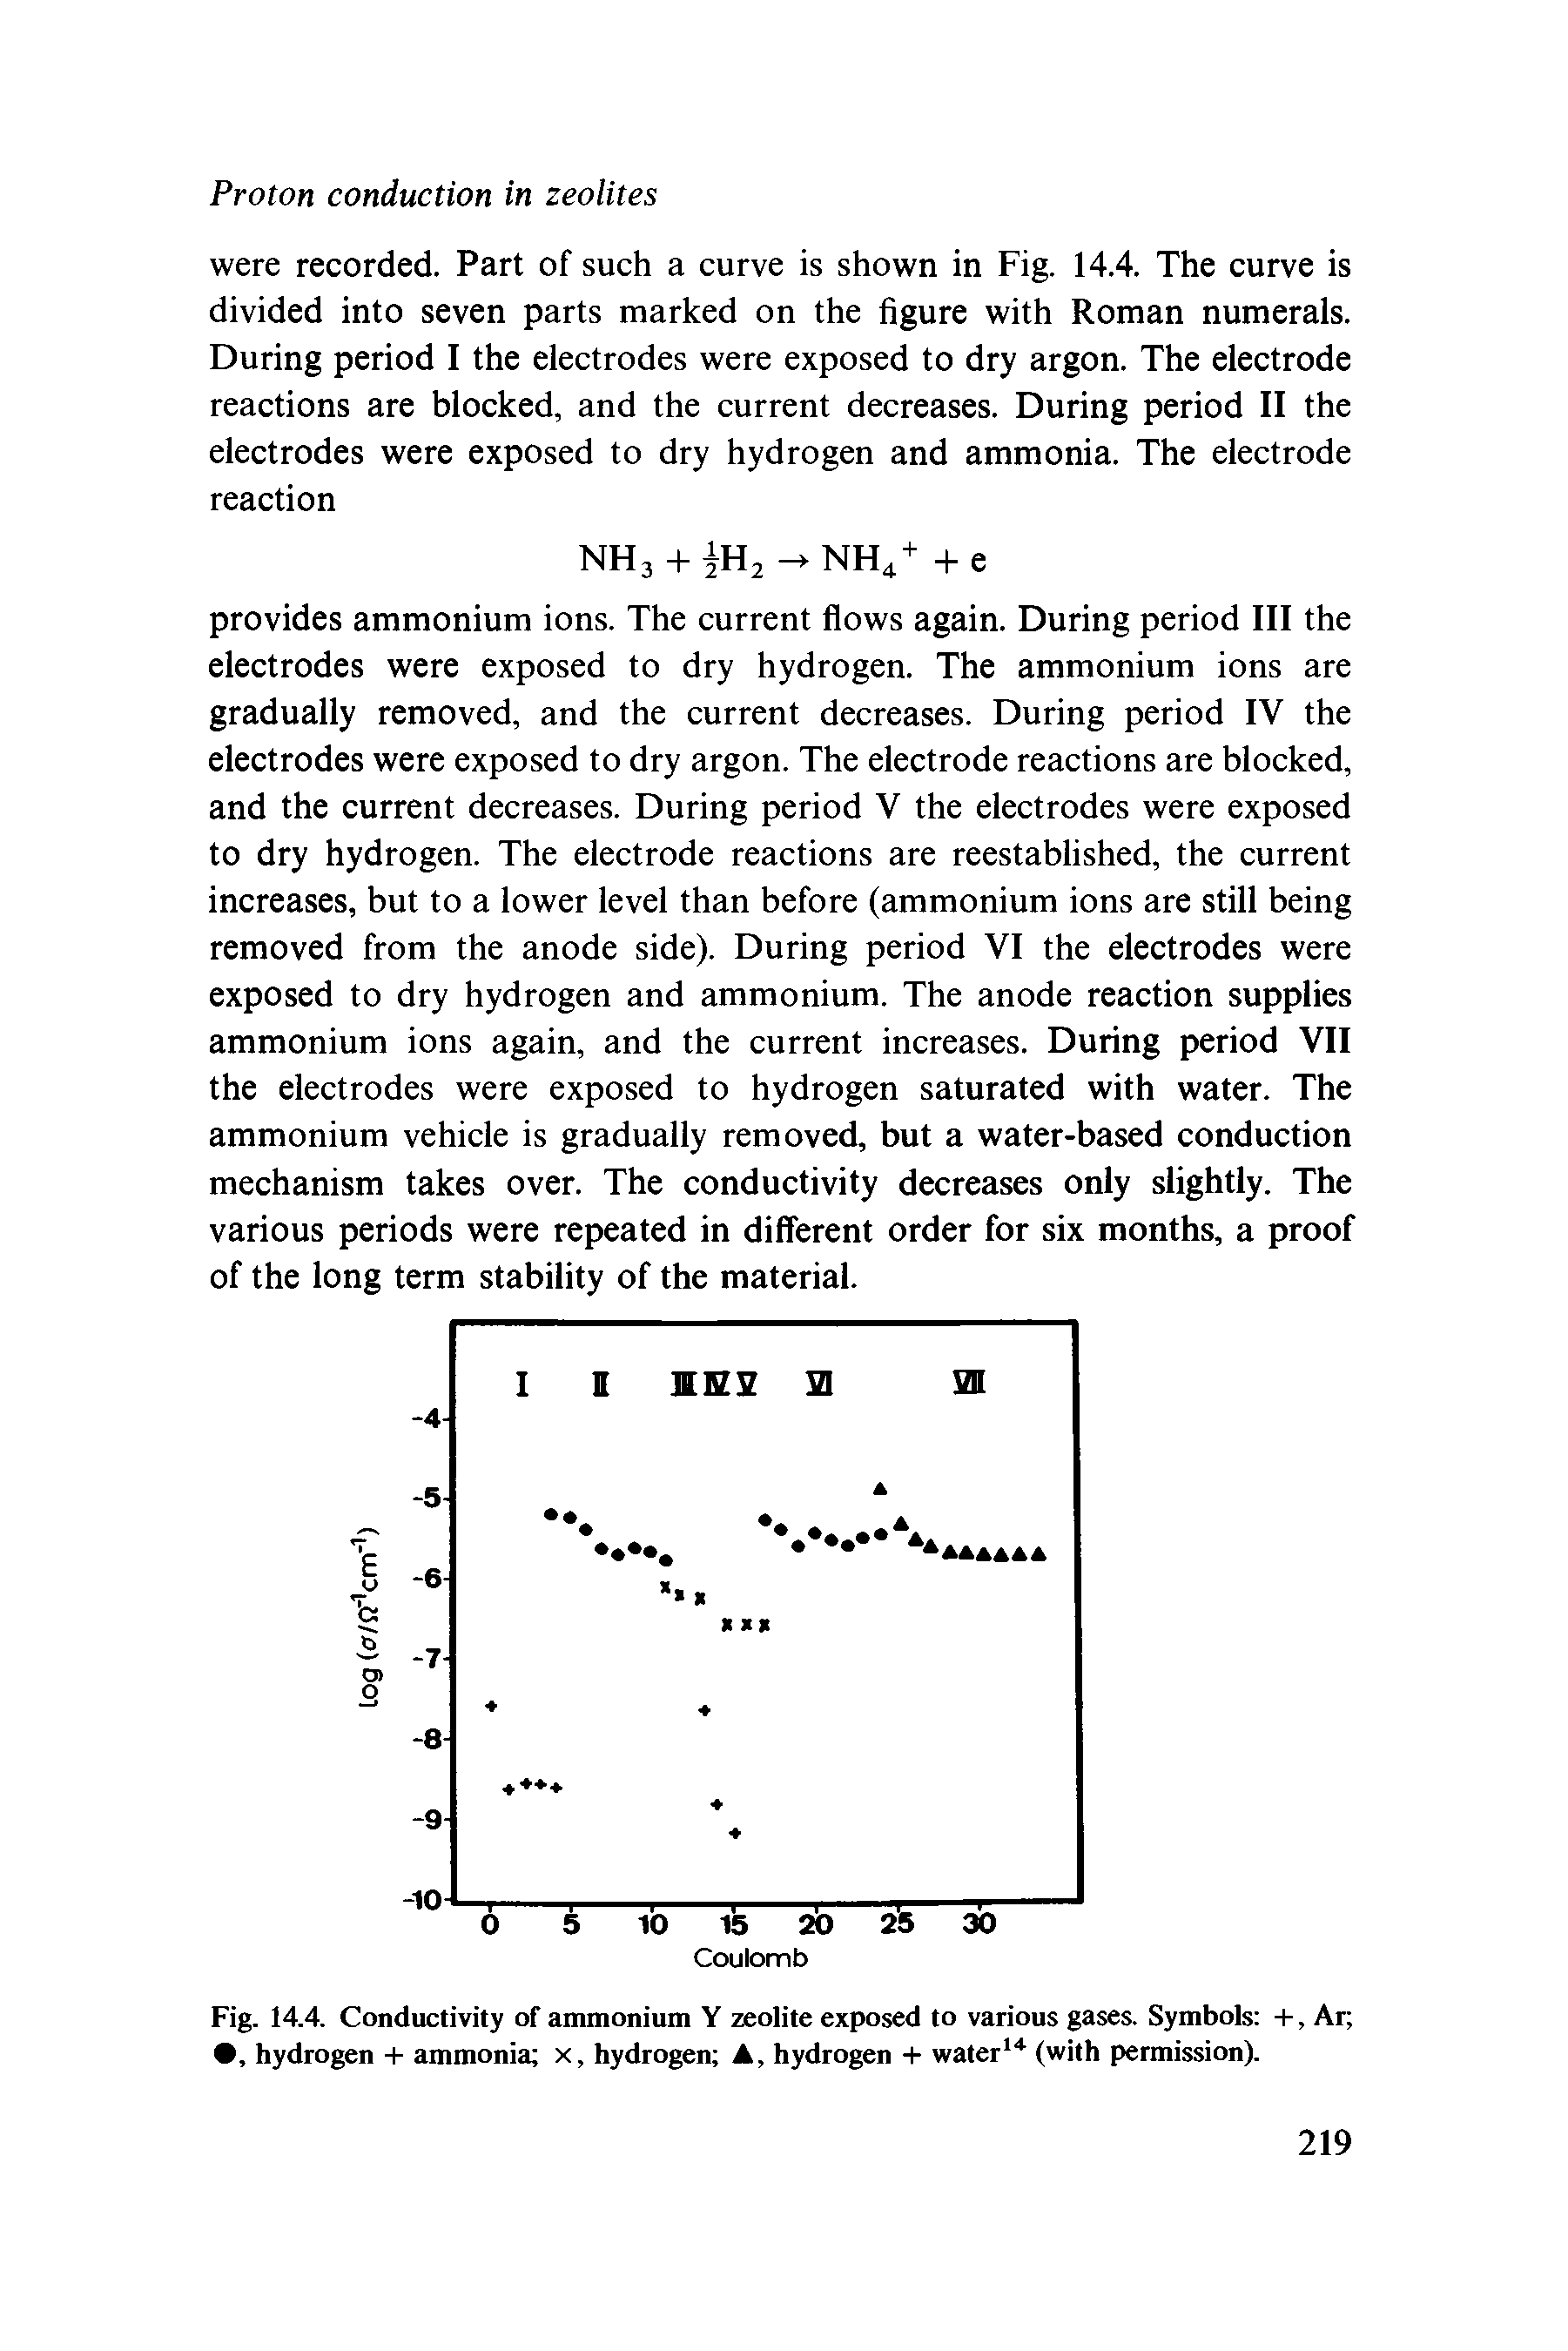 Fig. 14.4. Conductivity of ammonium Y zeolite exposed to various gases. Symbols +, Ar , hydrogen + ammonia x, hydrogen A, hydrogen + water (with permission).